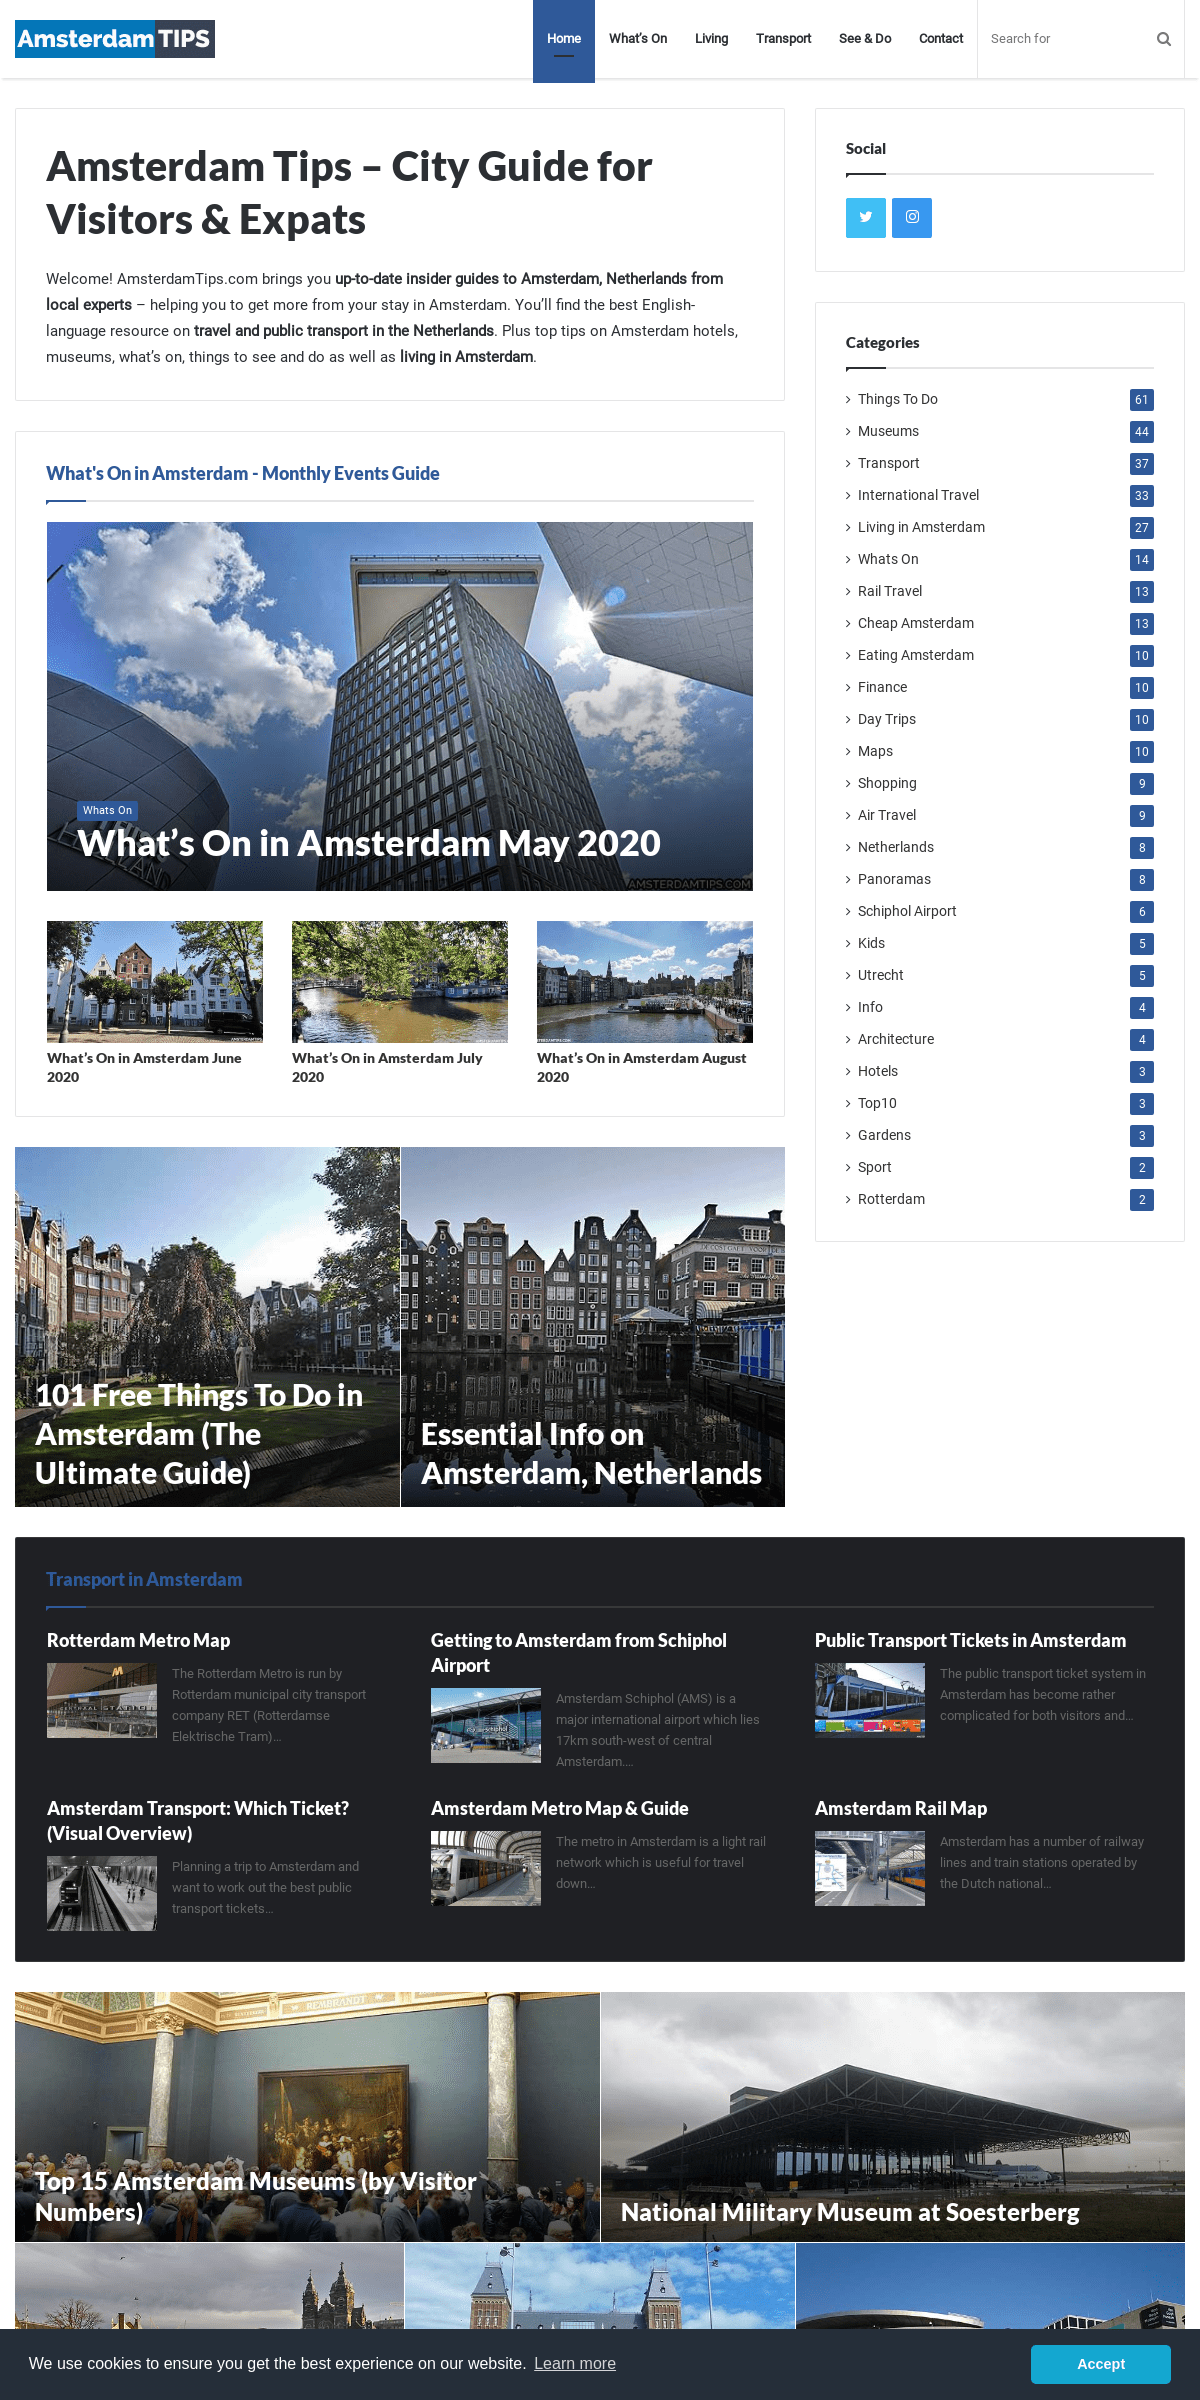 A complete backup of amsterdamtips.com